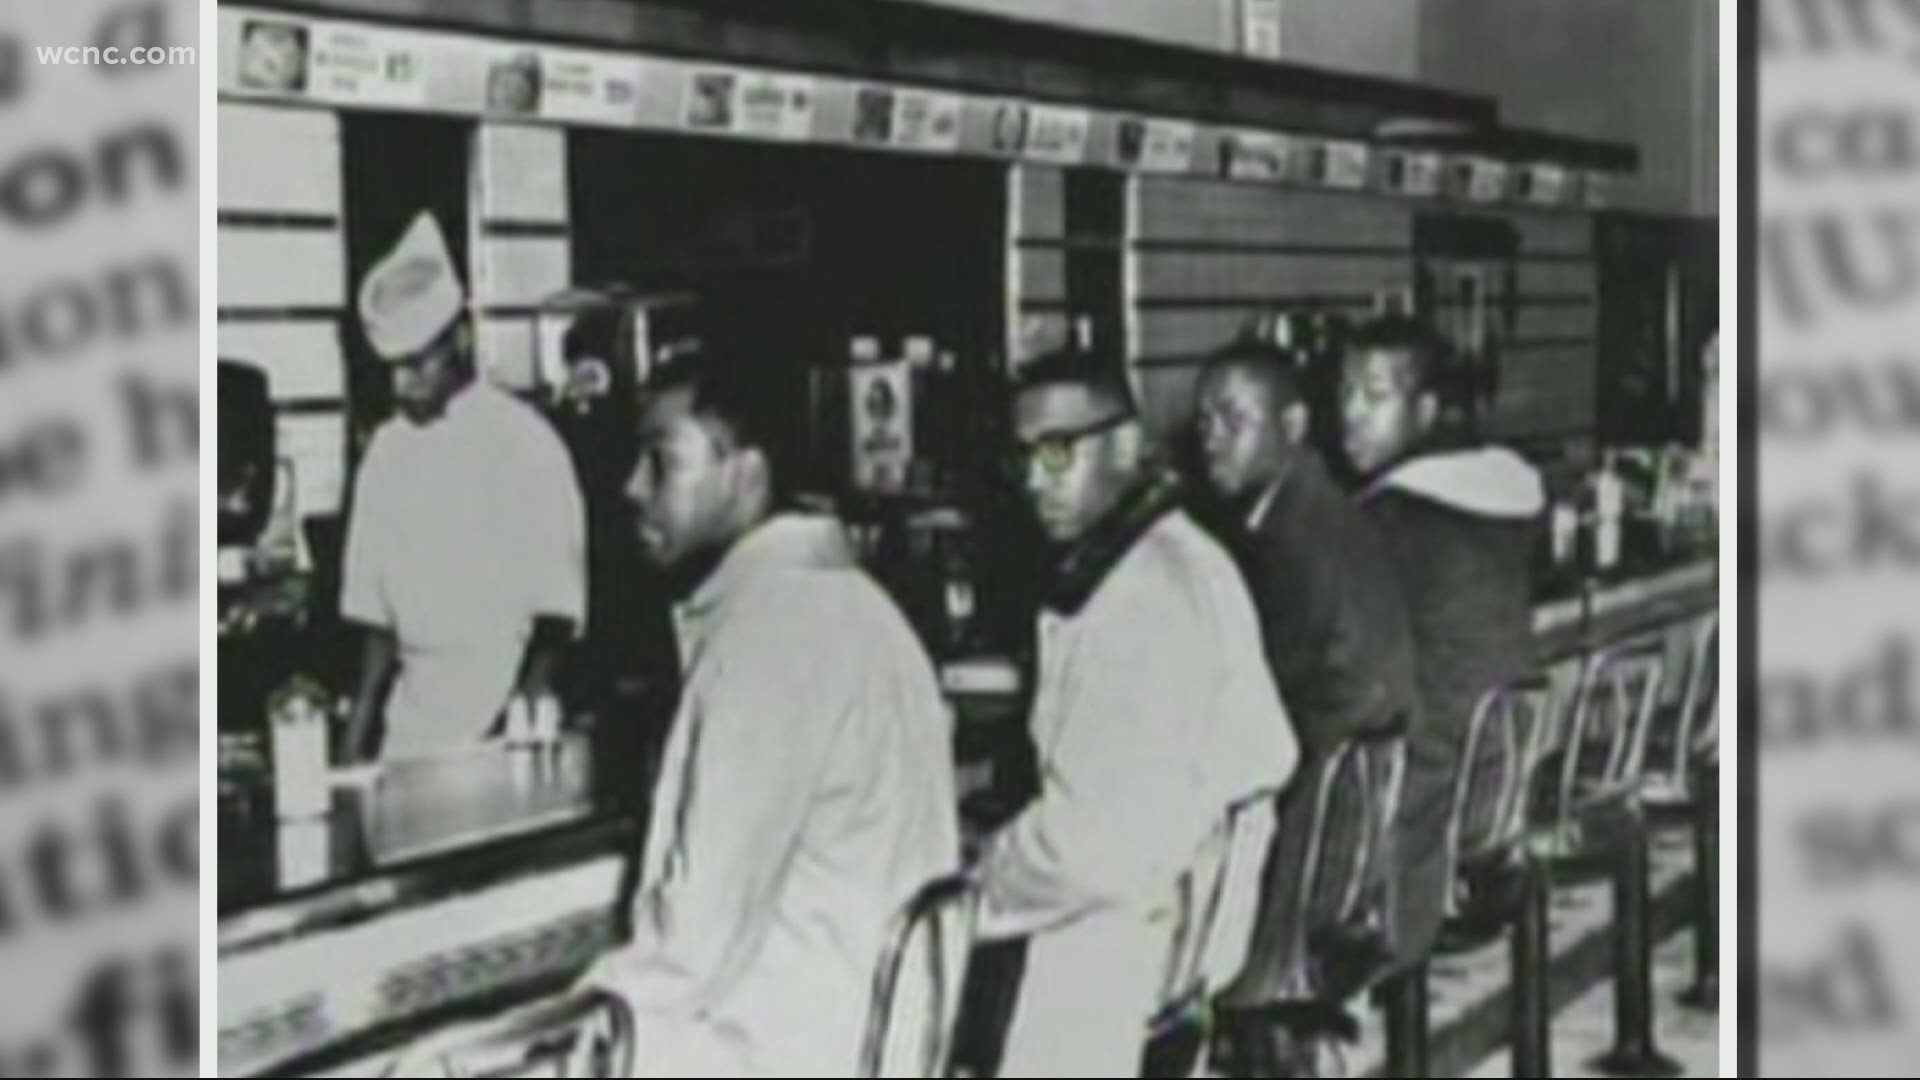 In 1960, four students from North Carolina A&T staged a sit-in at a whites-only lunch counter in downtown Greensboro.